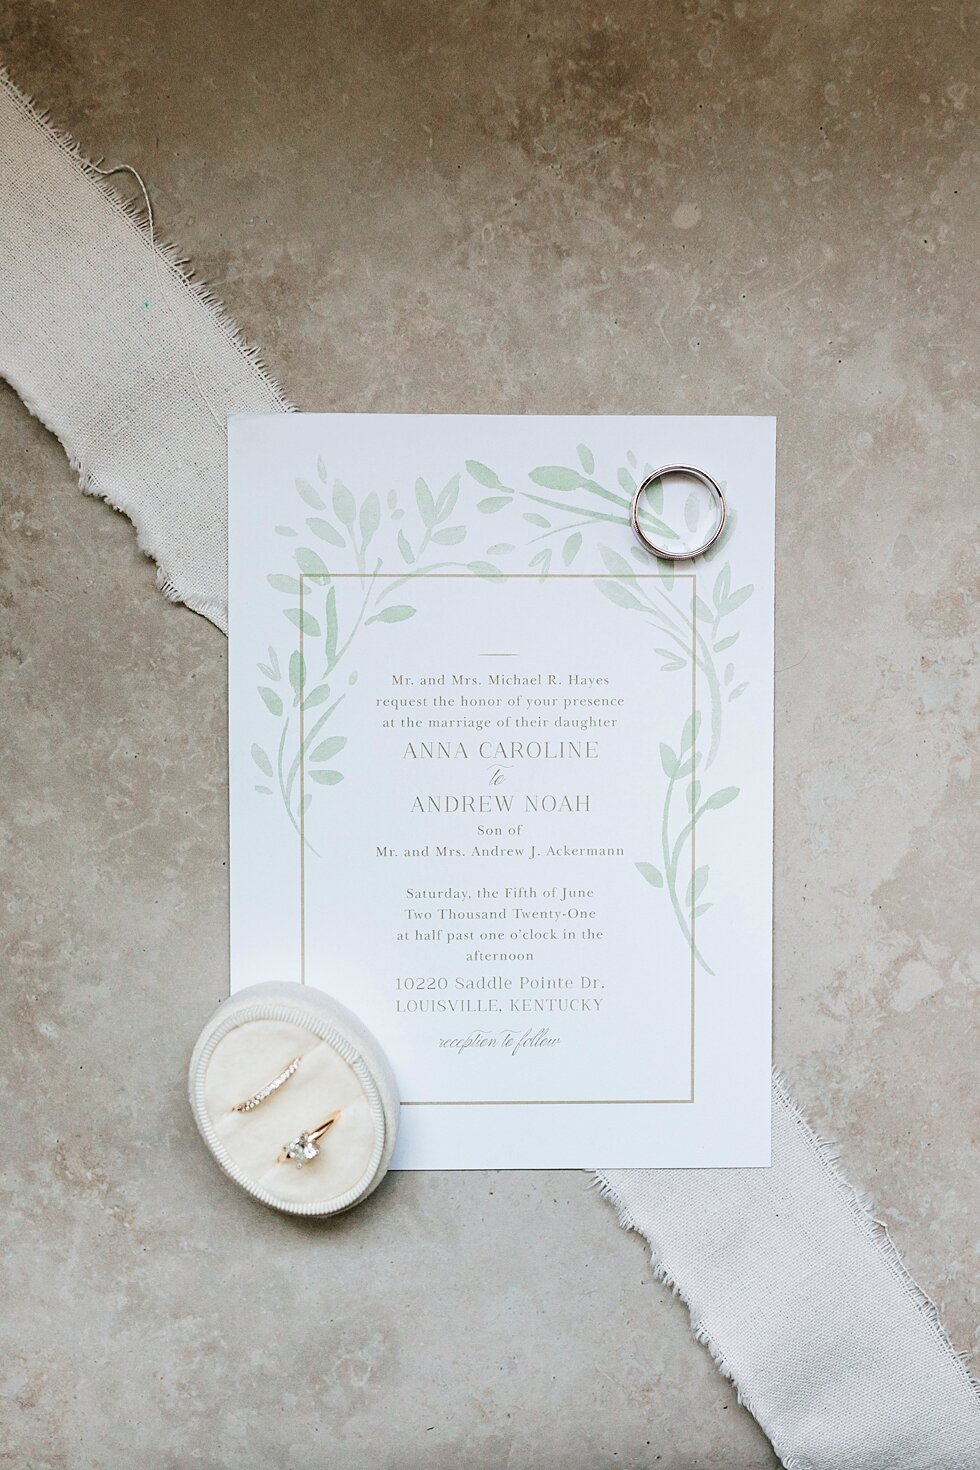  Beautiful stationary and wedding rings for this stunning bride and groom’s wedding day events. Romantic casual lace wedding gown close friends neutral colors background wedding natural greenery crisp white #midwestphotographer #kywedding #louisville